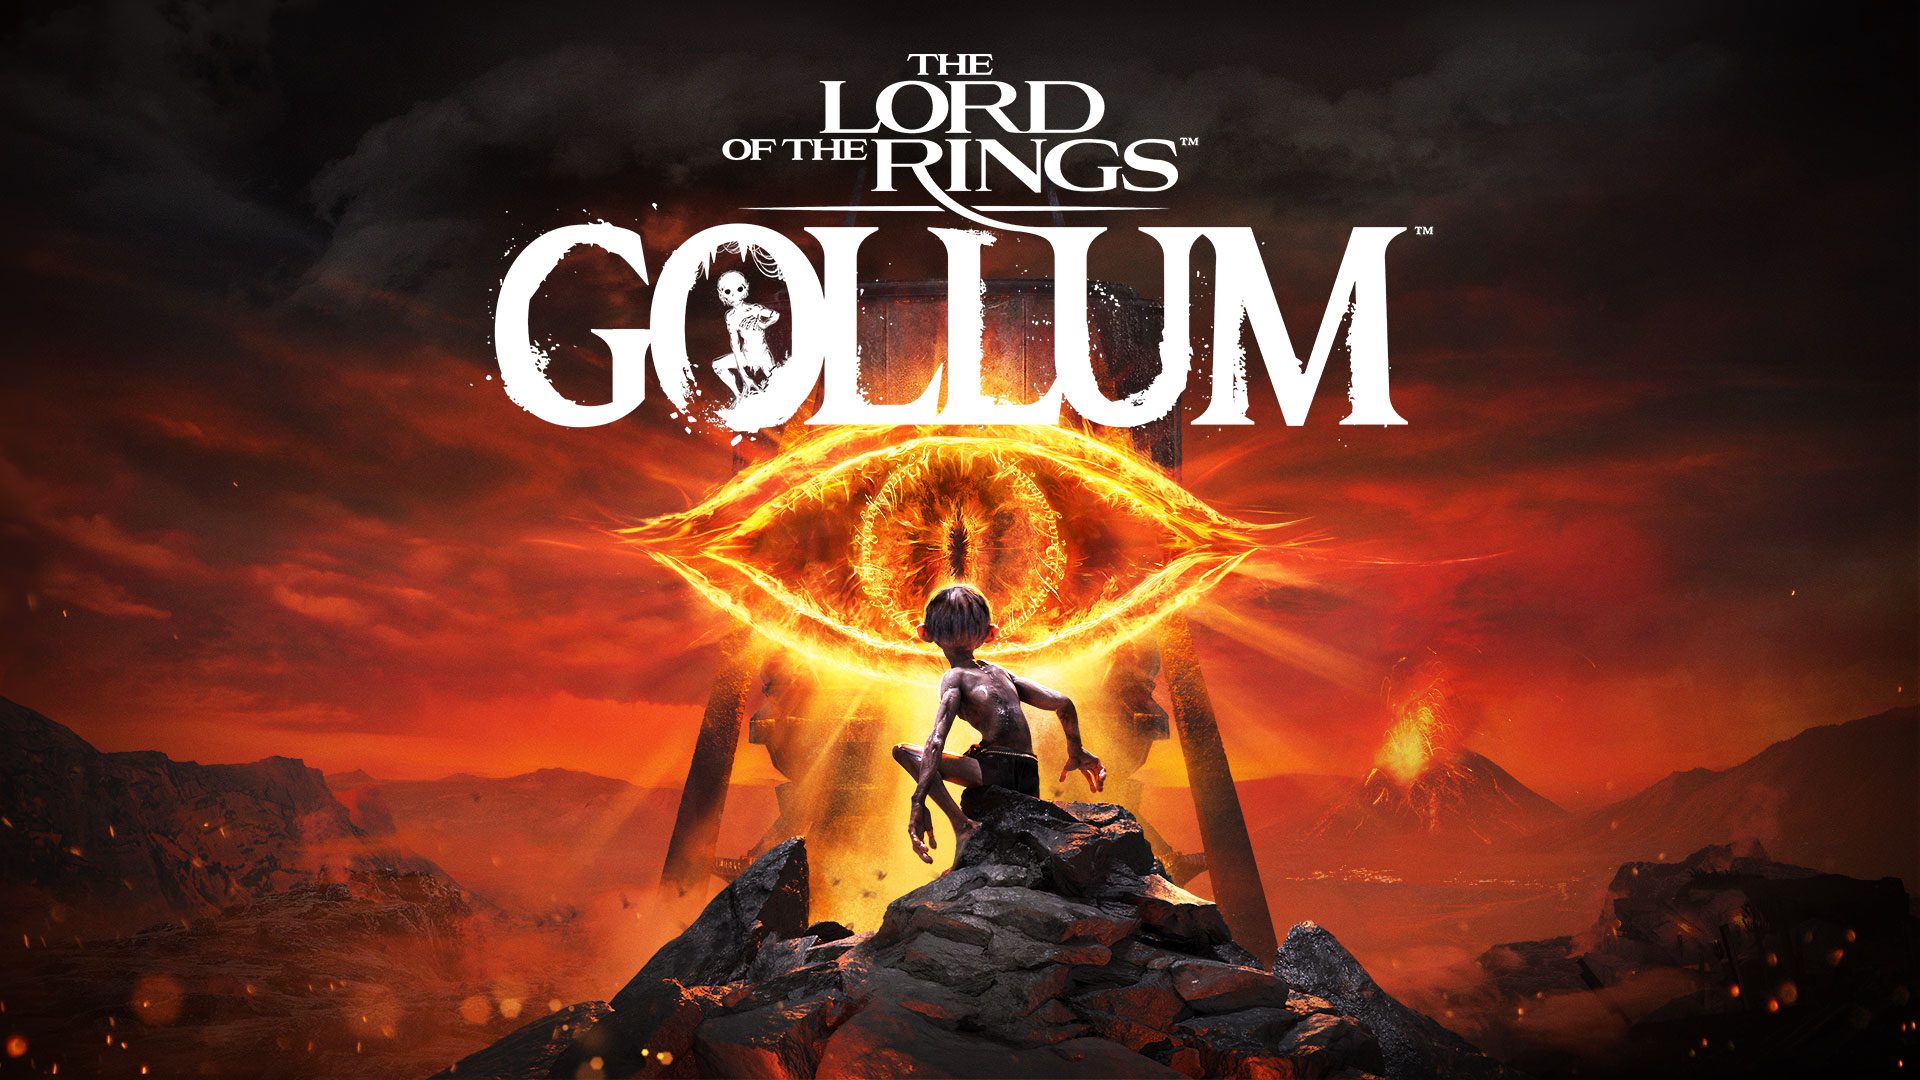 Lord of the Rings Gollum release date set; Switch release comes later - Stevivor